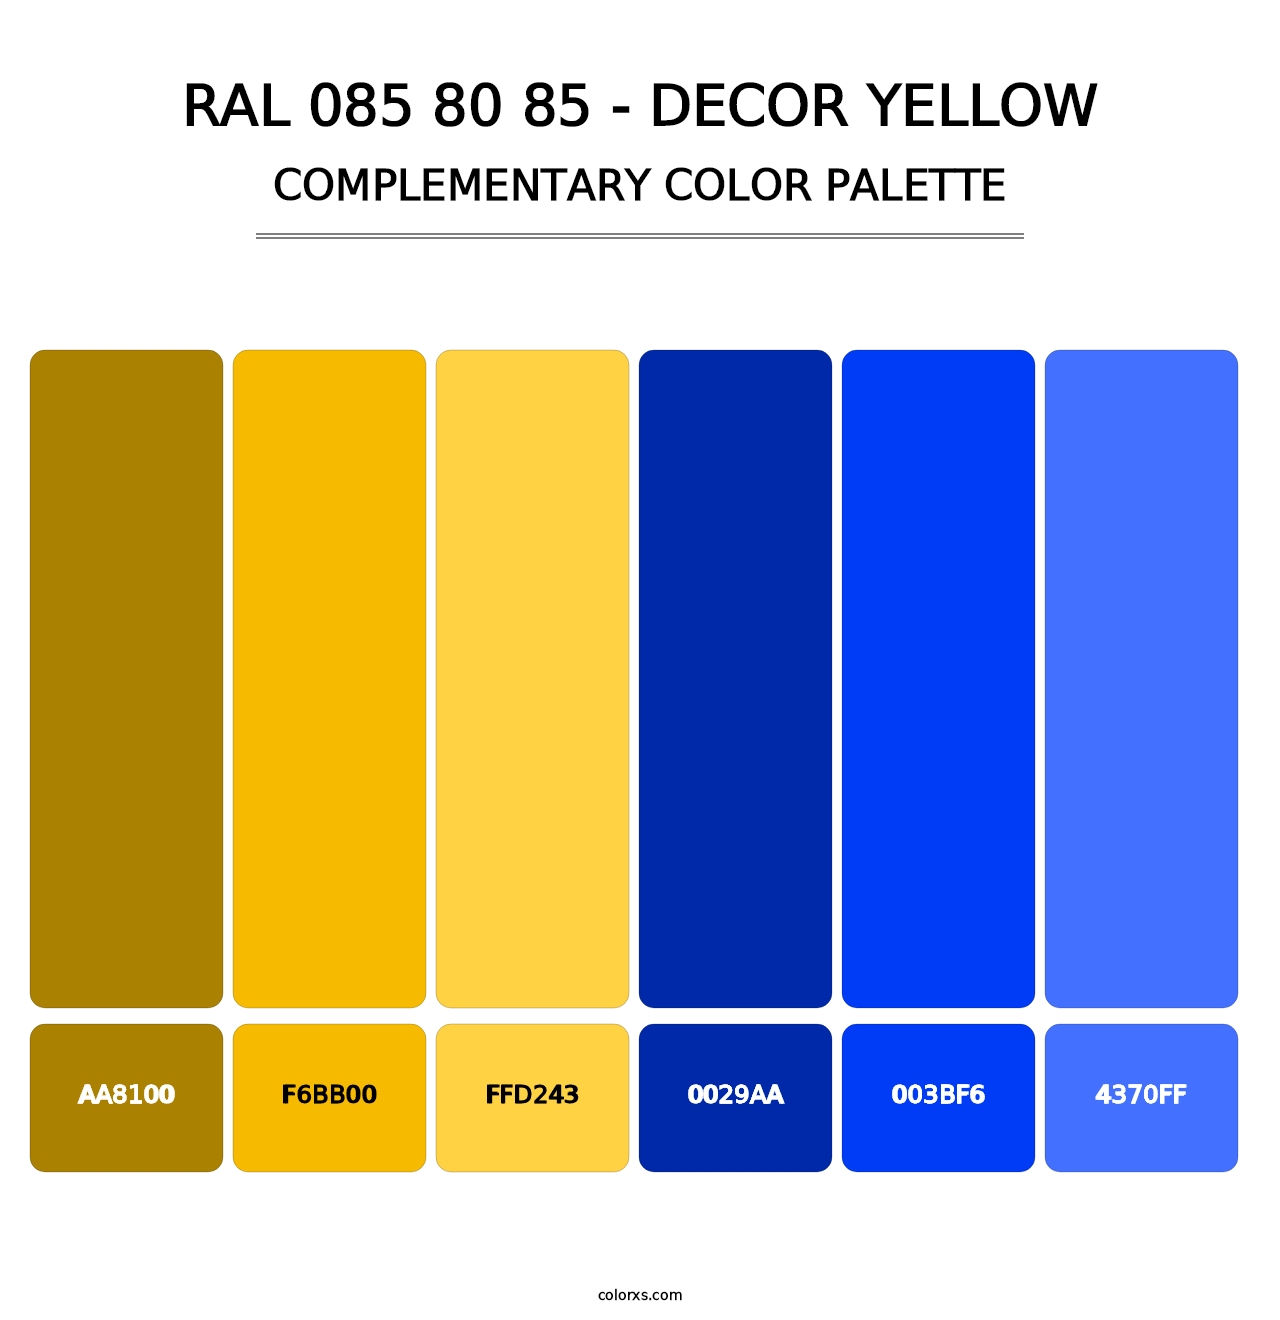 RAL 085 80 85 - Decor Yellow - Complementary Color Palette